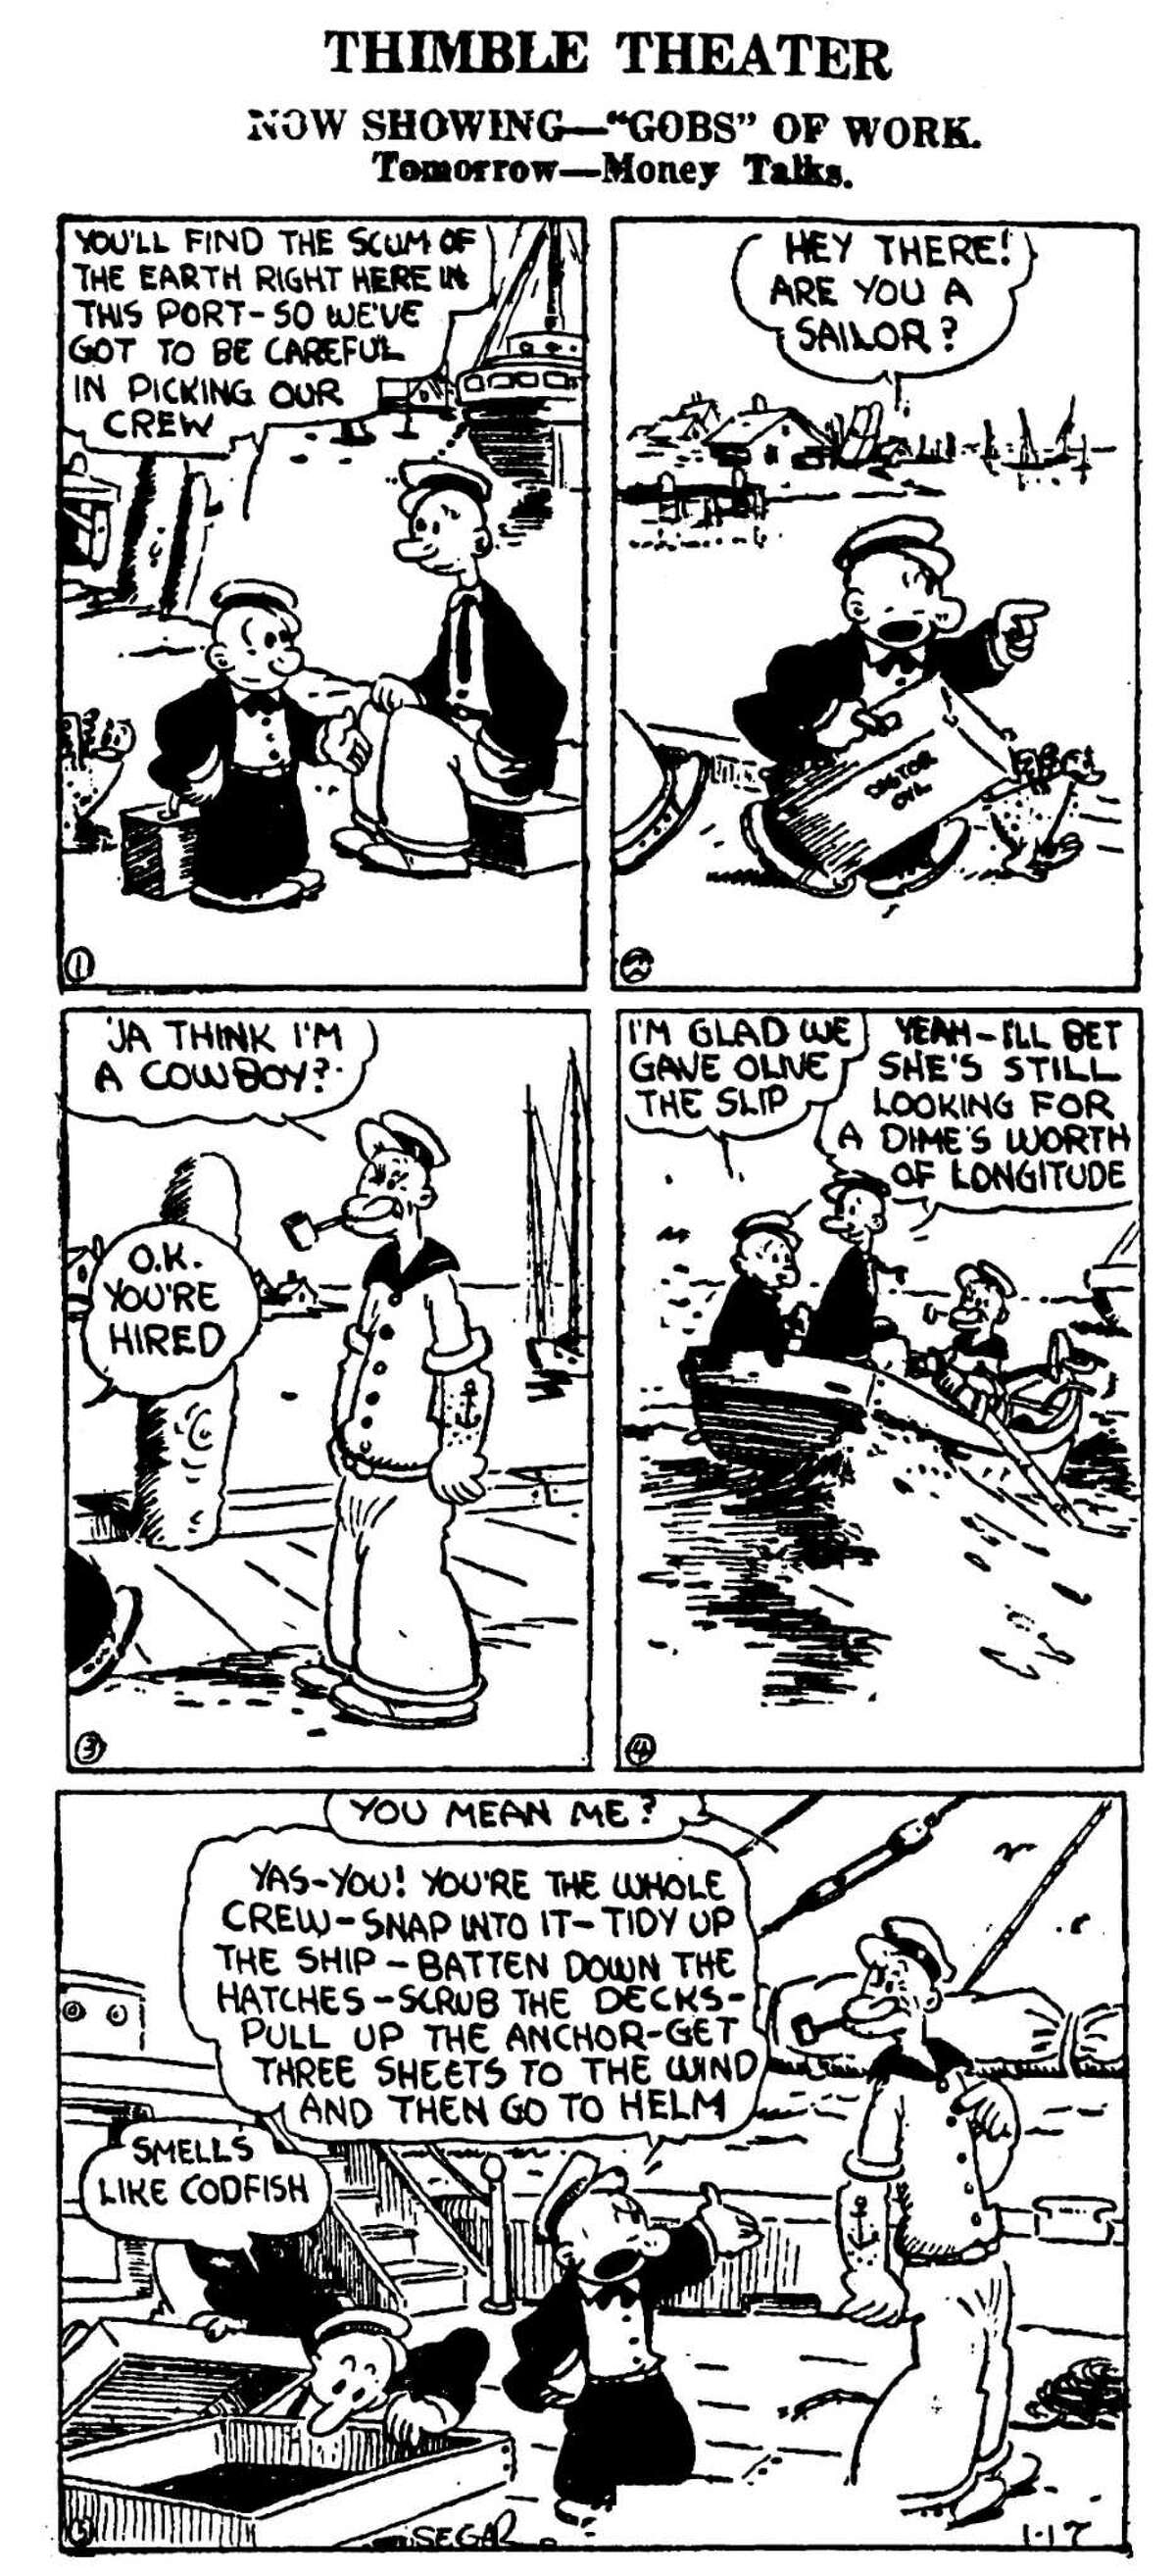 Popeye first appeared in this comic 